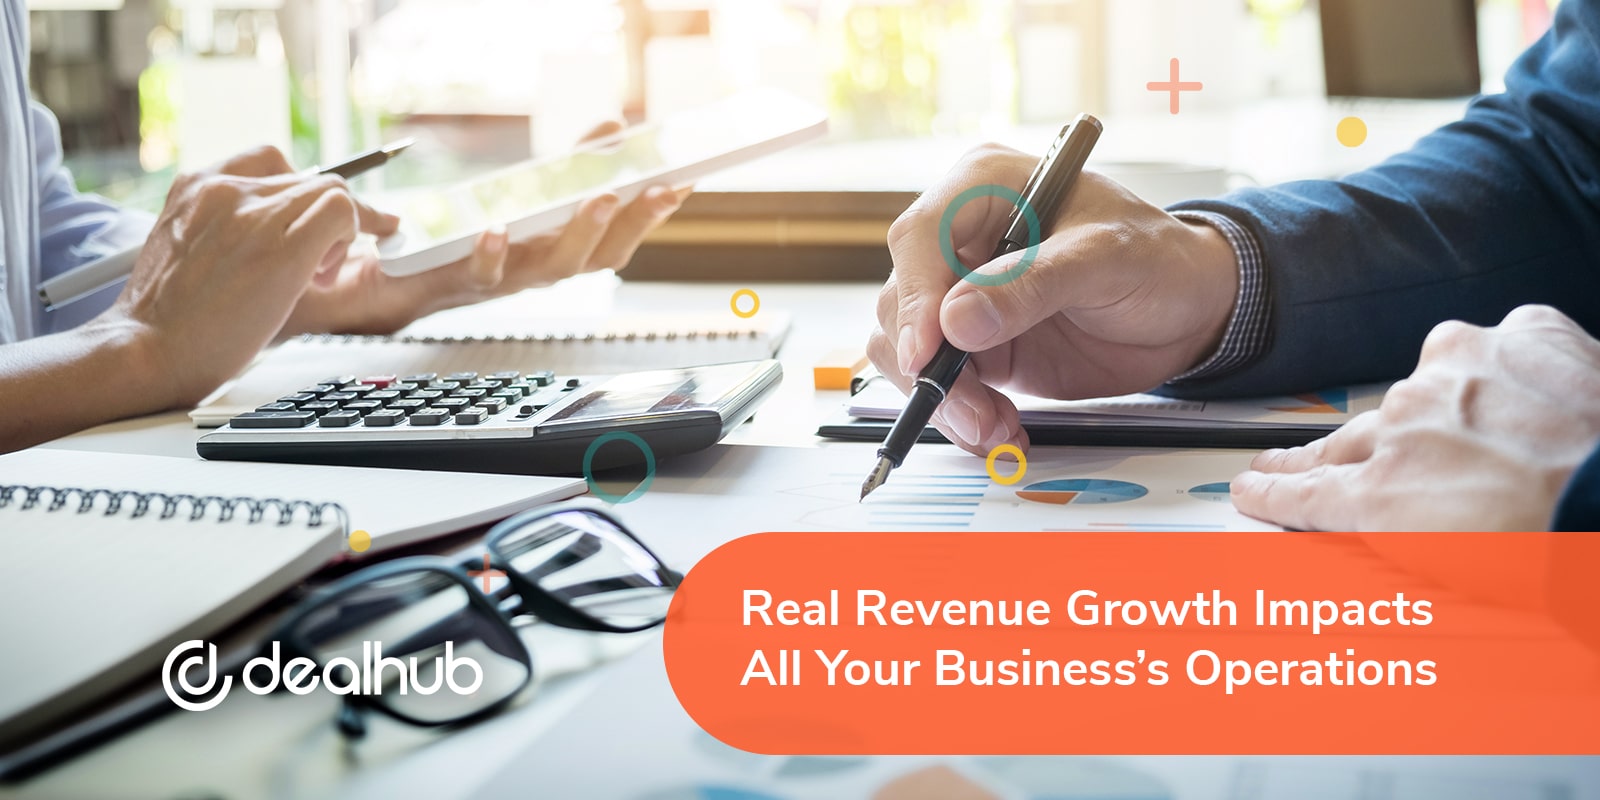 Real Revenue Growth Impacts All Your Business Operations